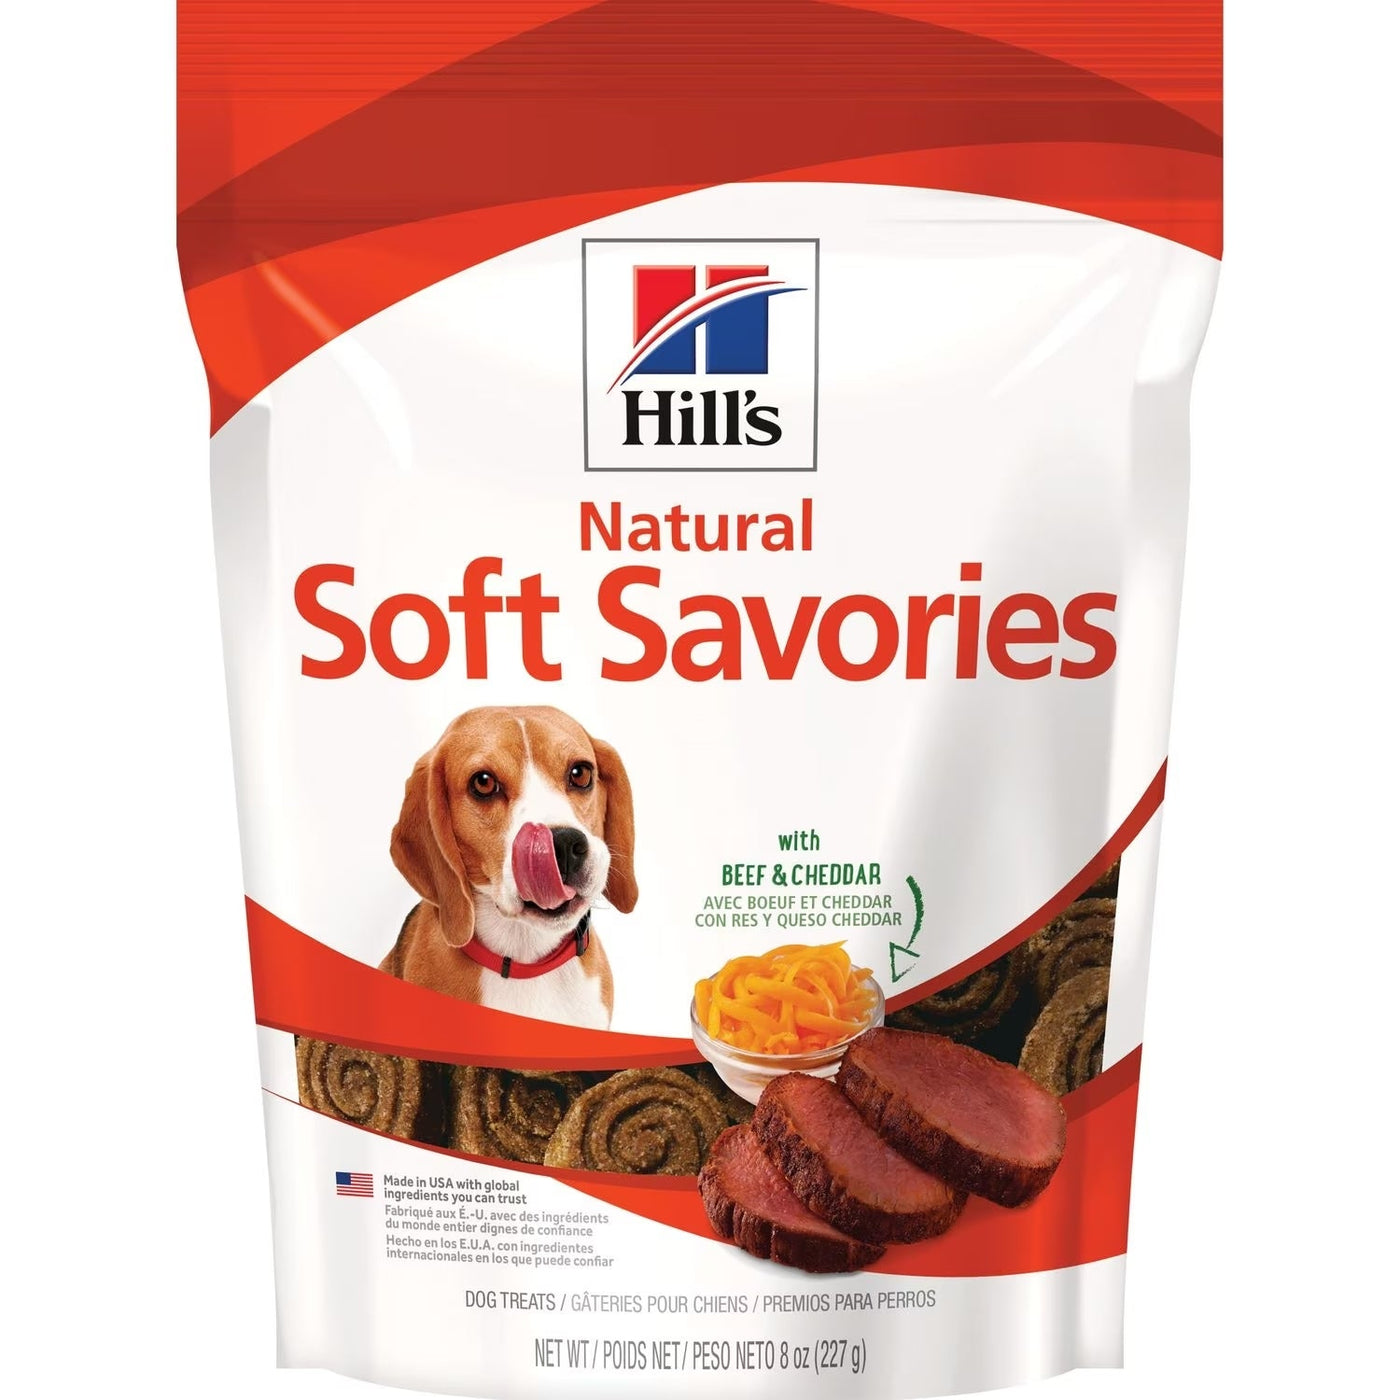 Hill's Natural Soft Savories Beef & Cheddar - Dog Treats - Hill's Science Diet